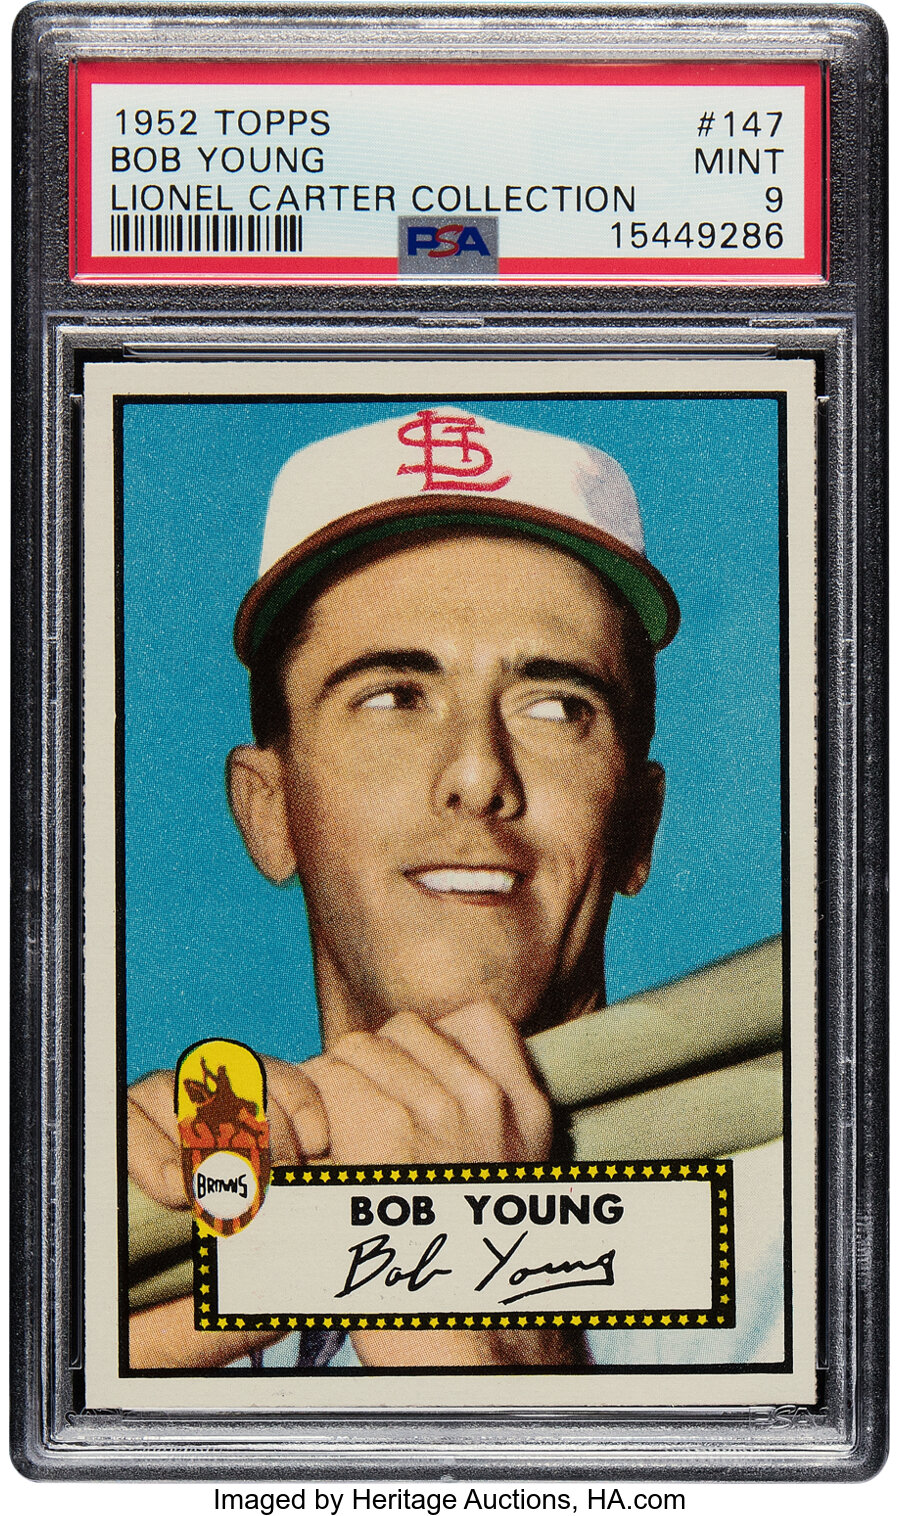 1952 Topps Bob Young Rookie #147 PSA Mint 9 - Pop Six, None Superior! From the Lionel Carter Collection